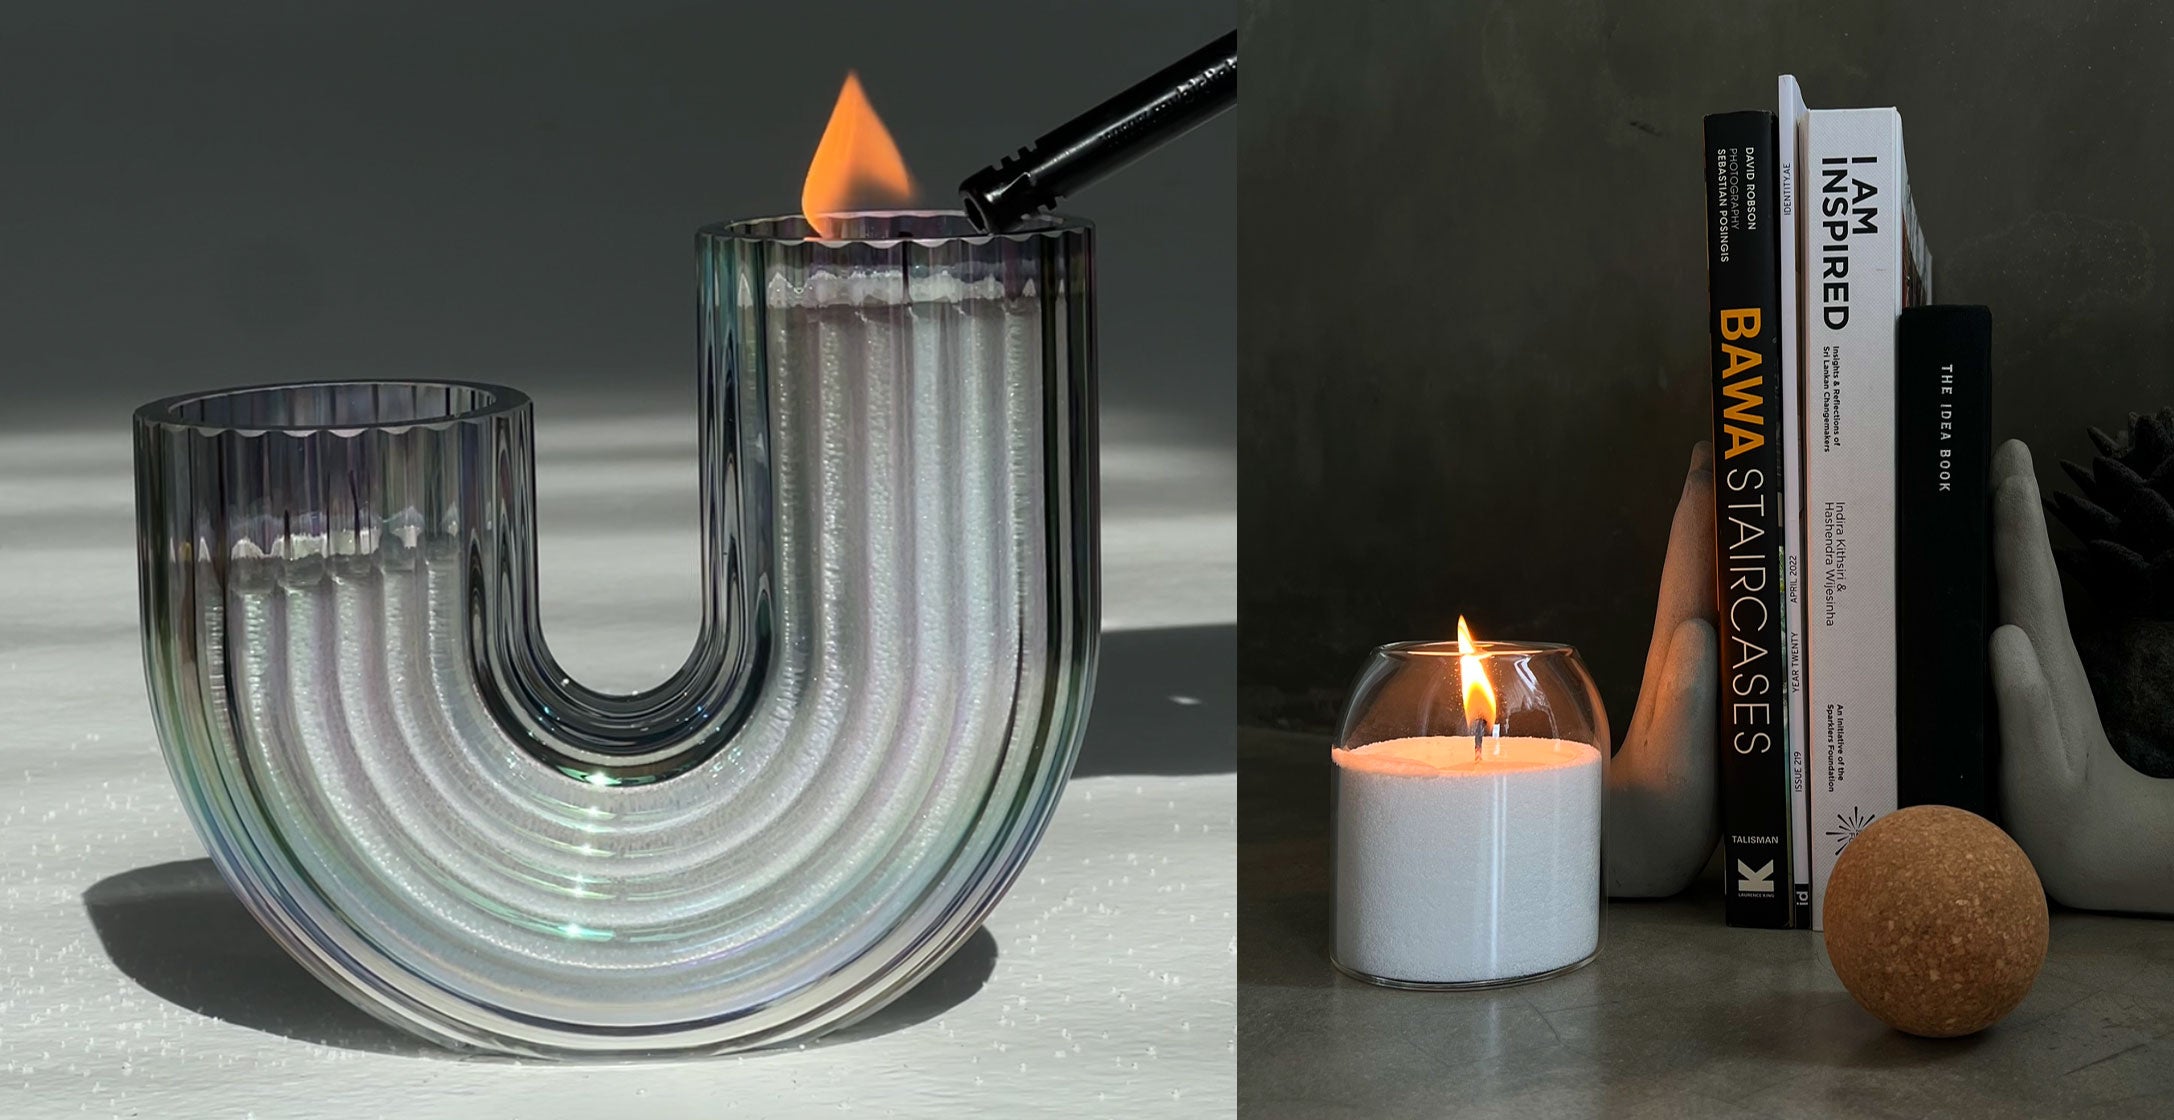 The Ultimate Candle Sand Experience: Transforming Ordinary Candles, by The  candledust